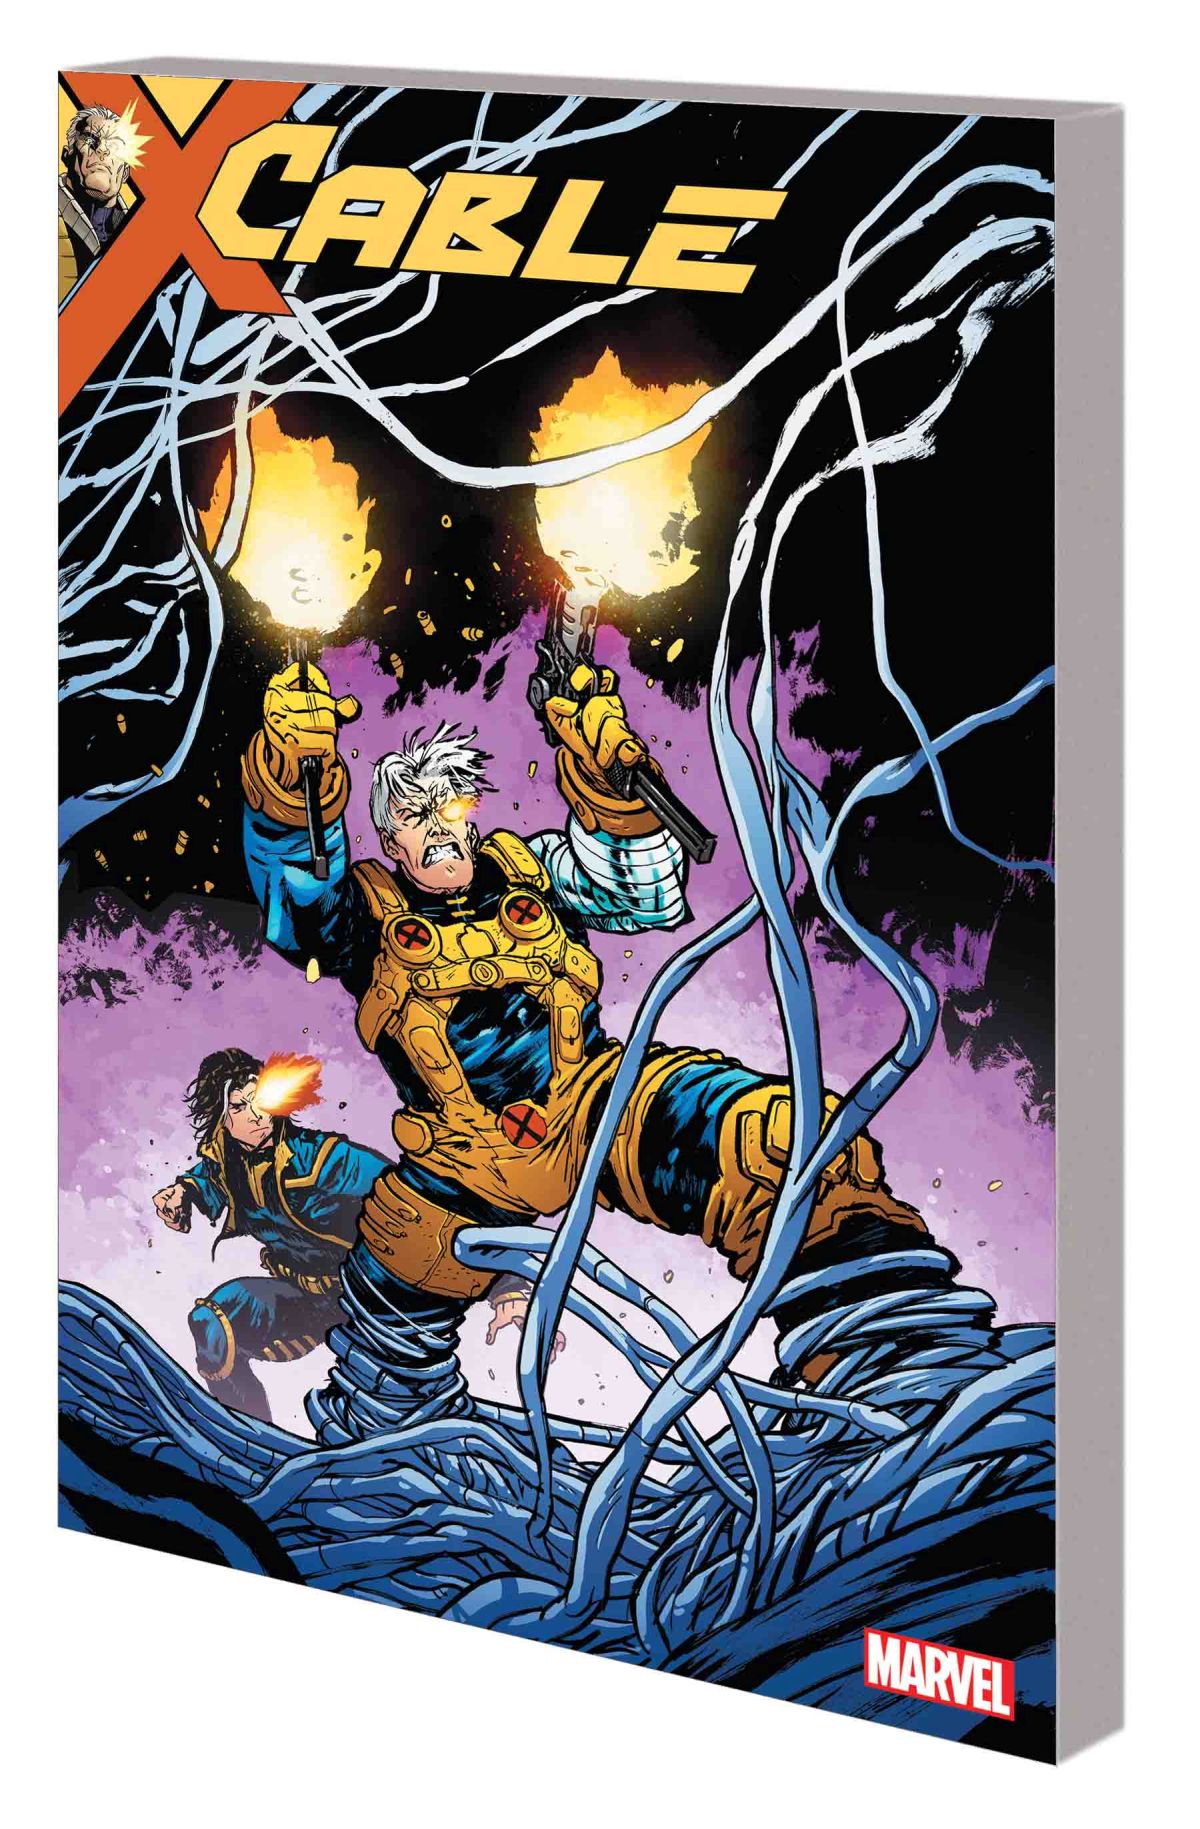 CABLE VOL. 3: PAST FEARS